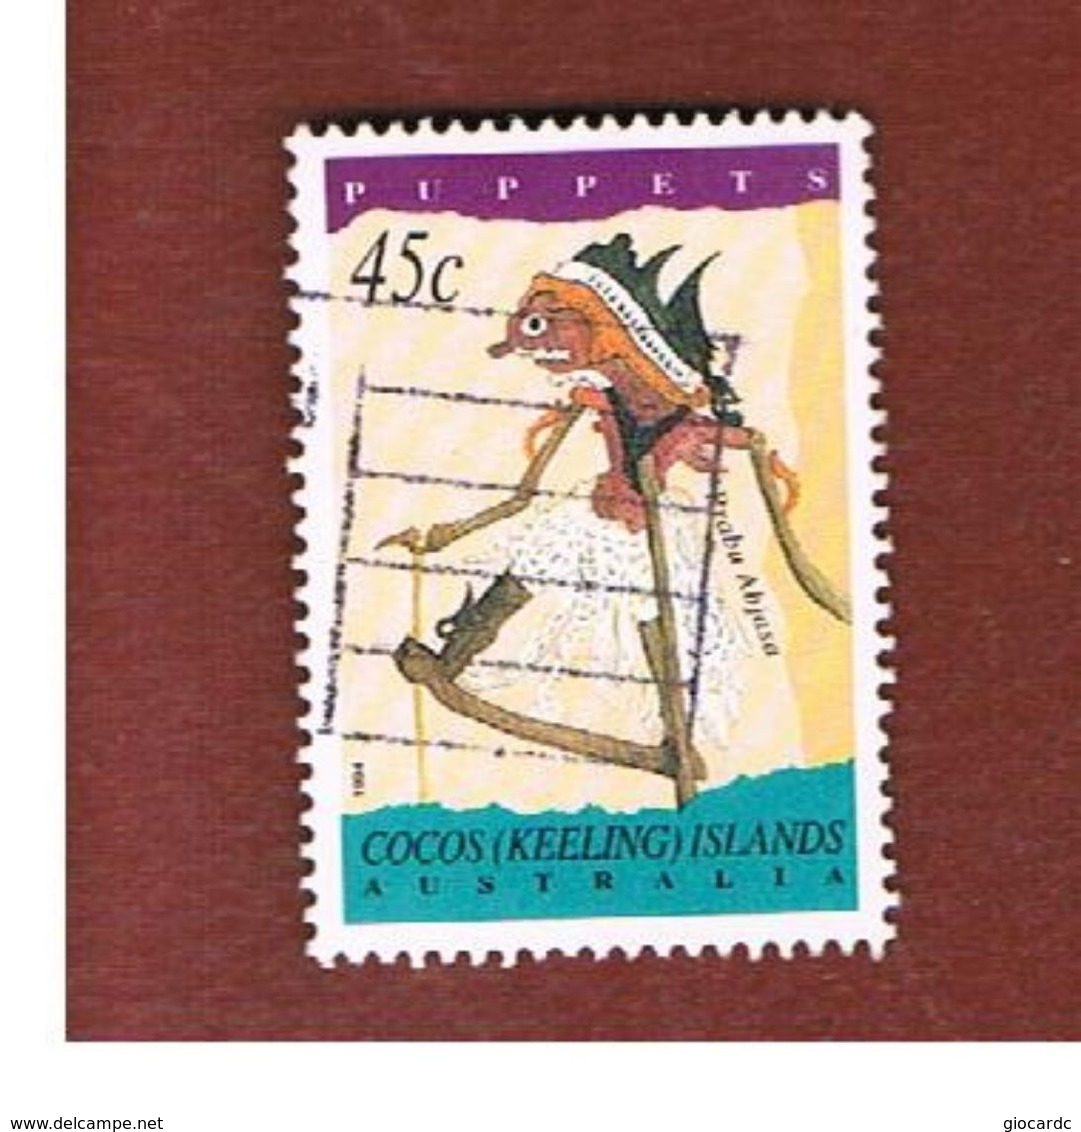 ISOLE COCOS (KEELING ISLANDS) - SG 316 - 1994  SHADOW PUPPETS  - USED° - Isole Cocos (Keeling)